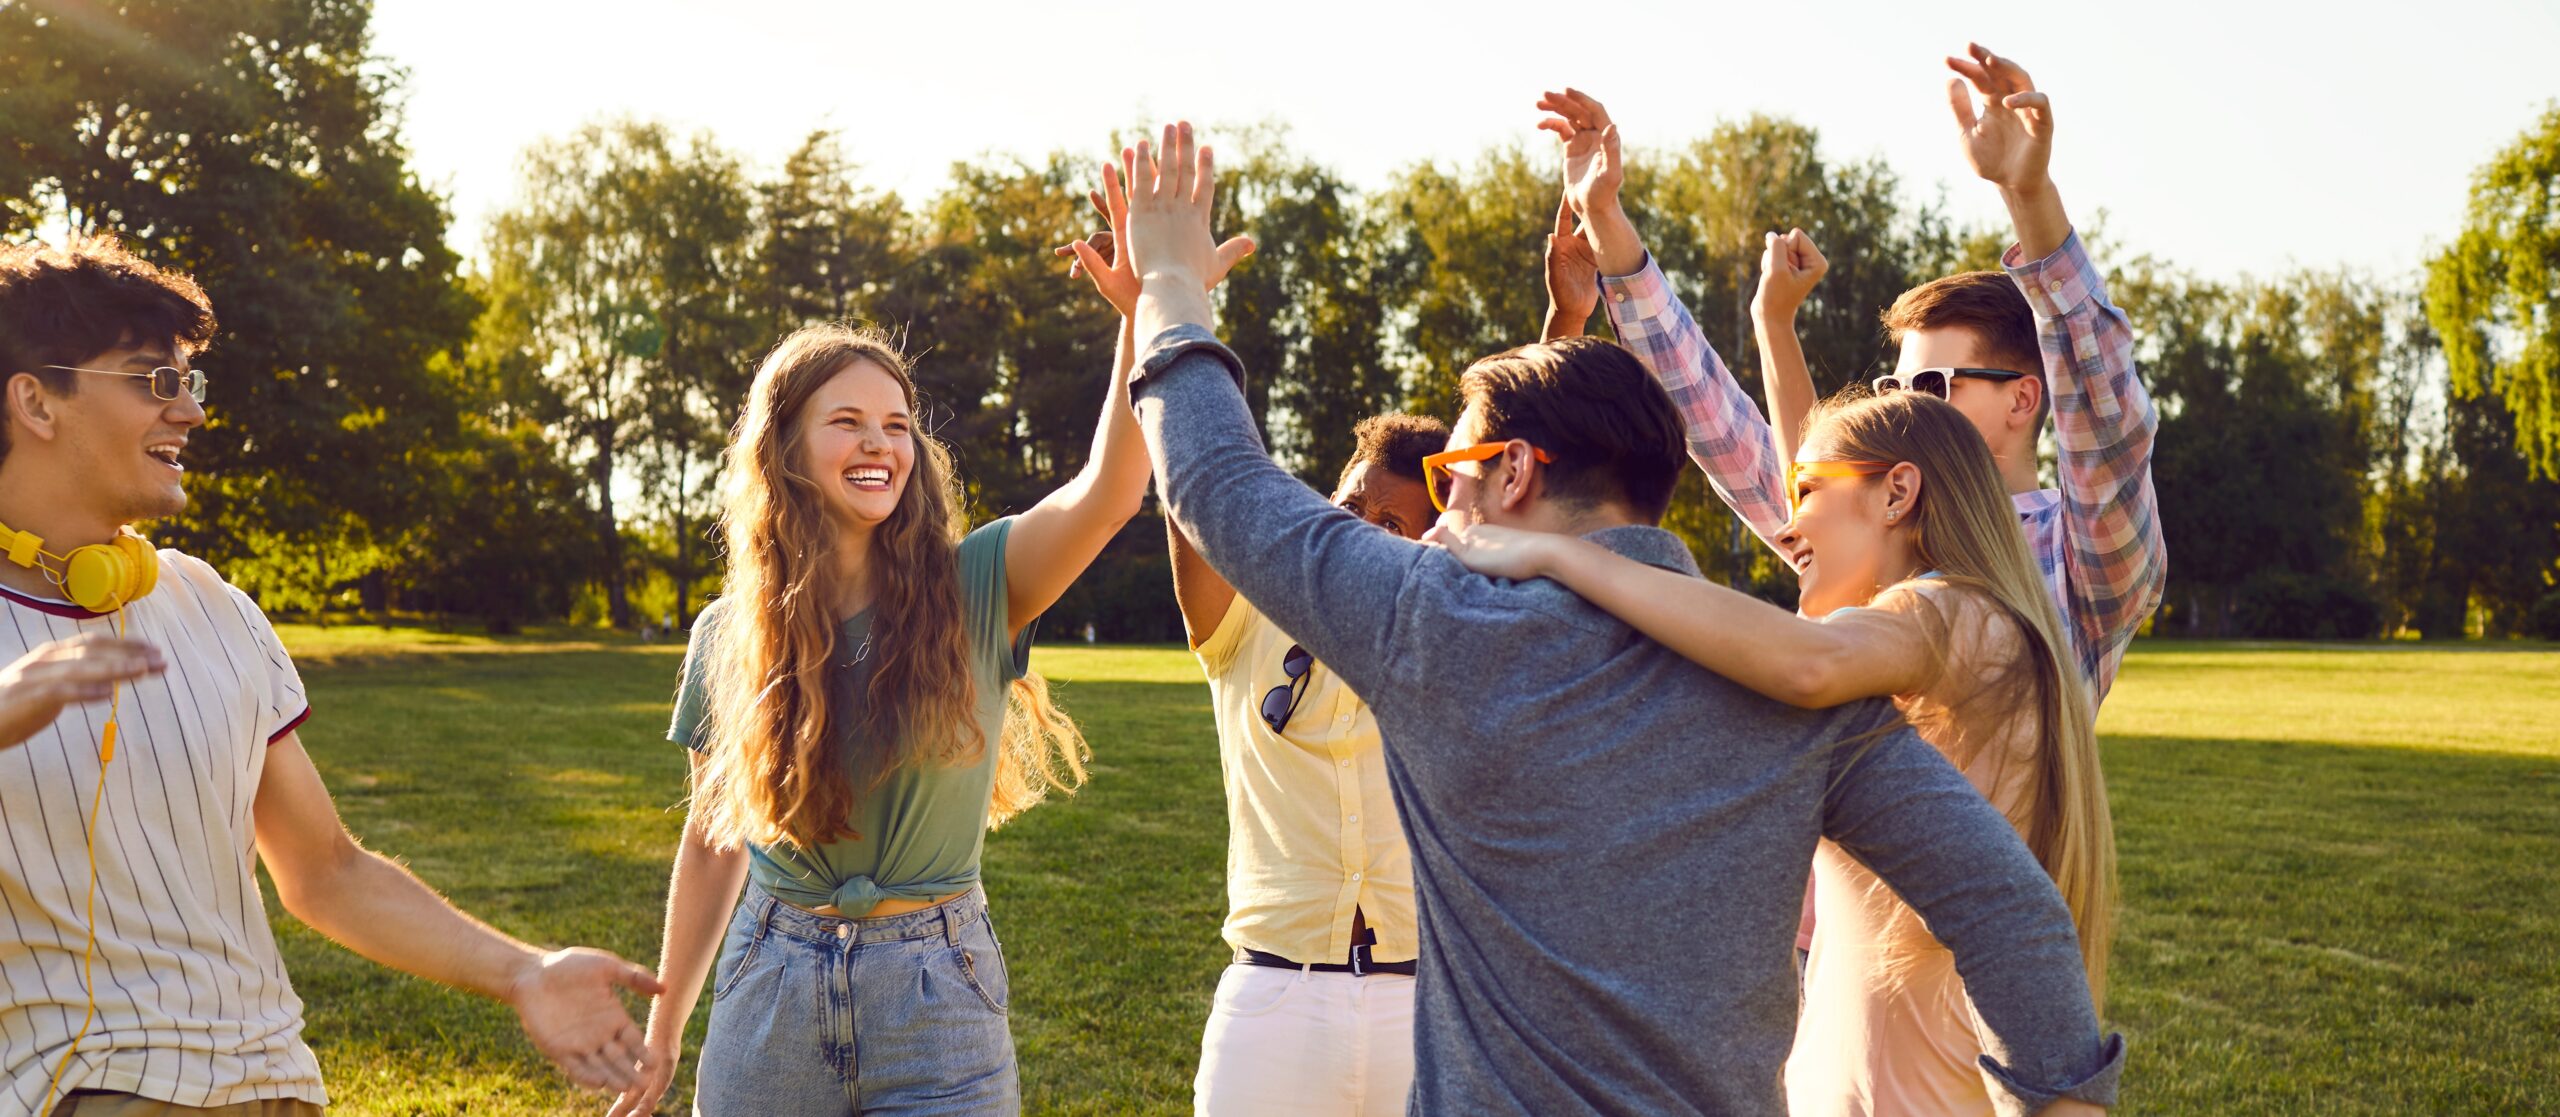 Group of young adults high-fiving and enjoying a sunny day outdoors.